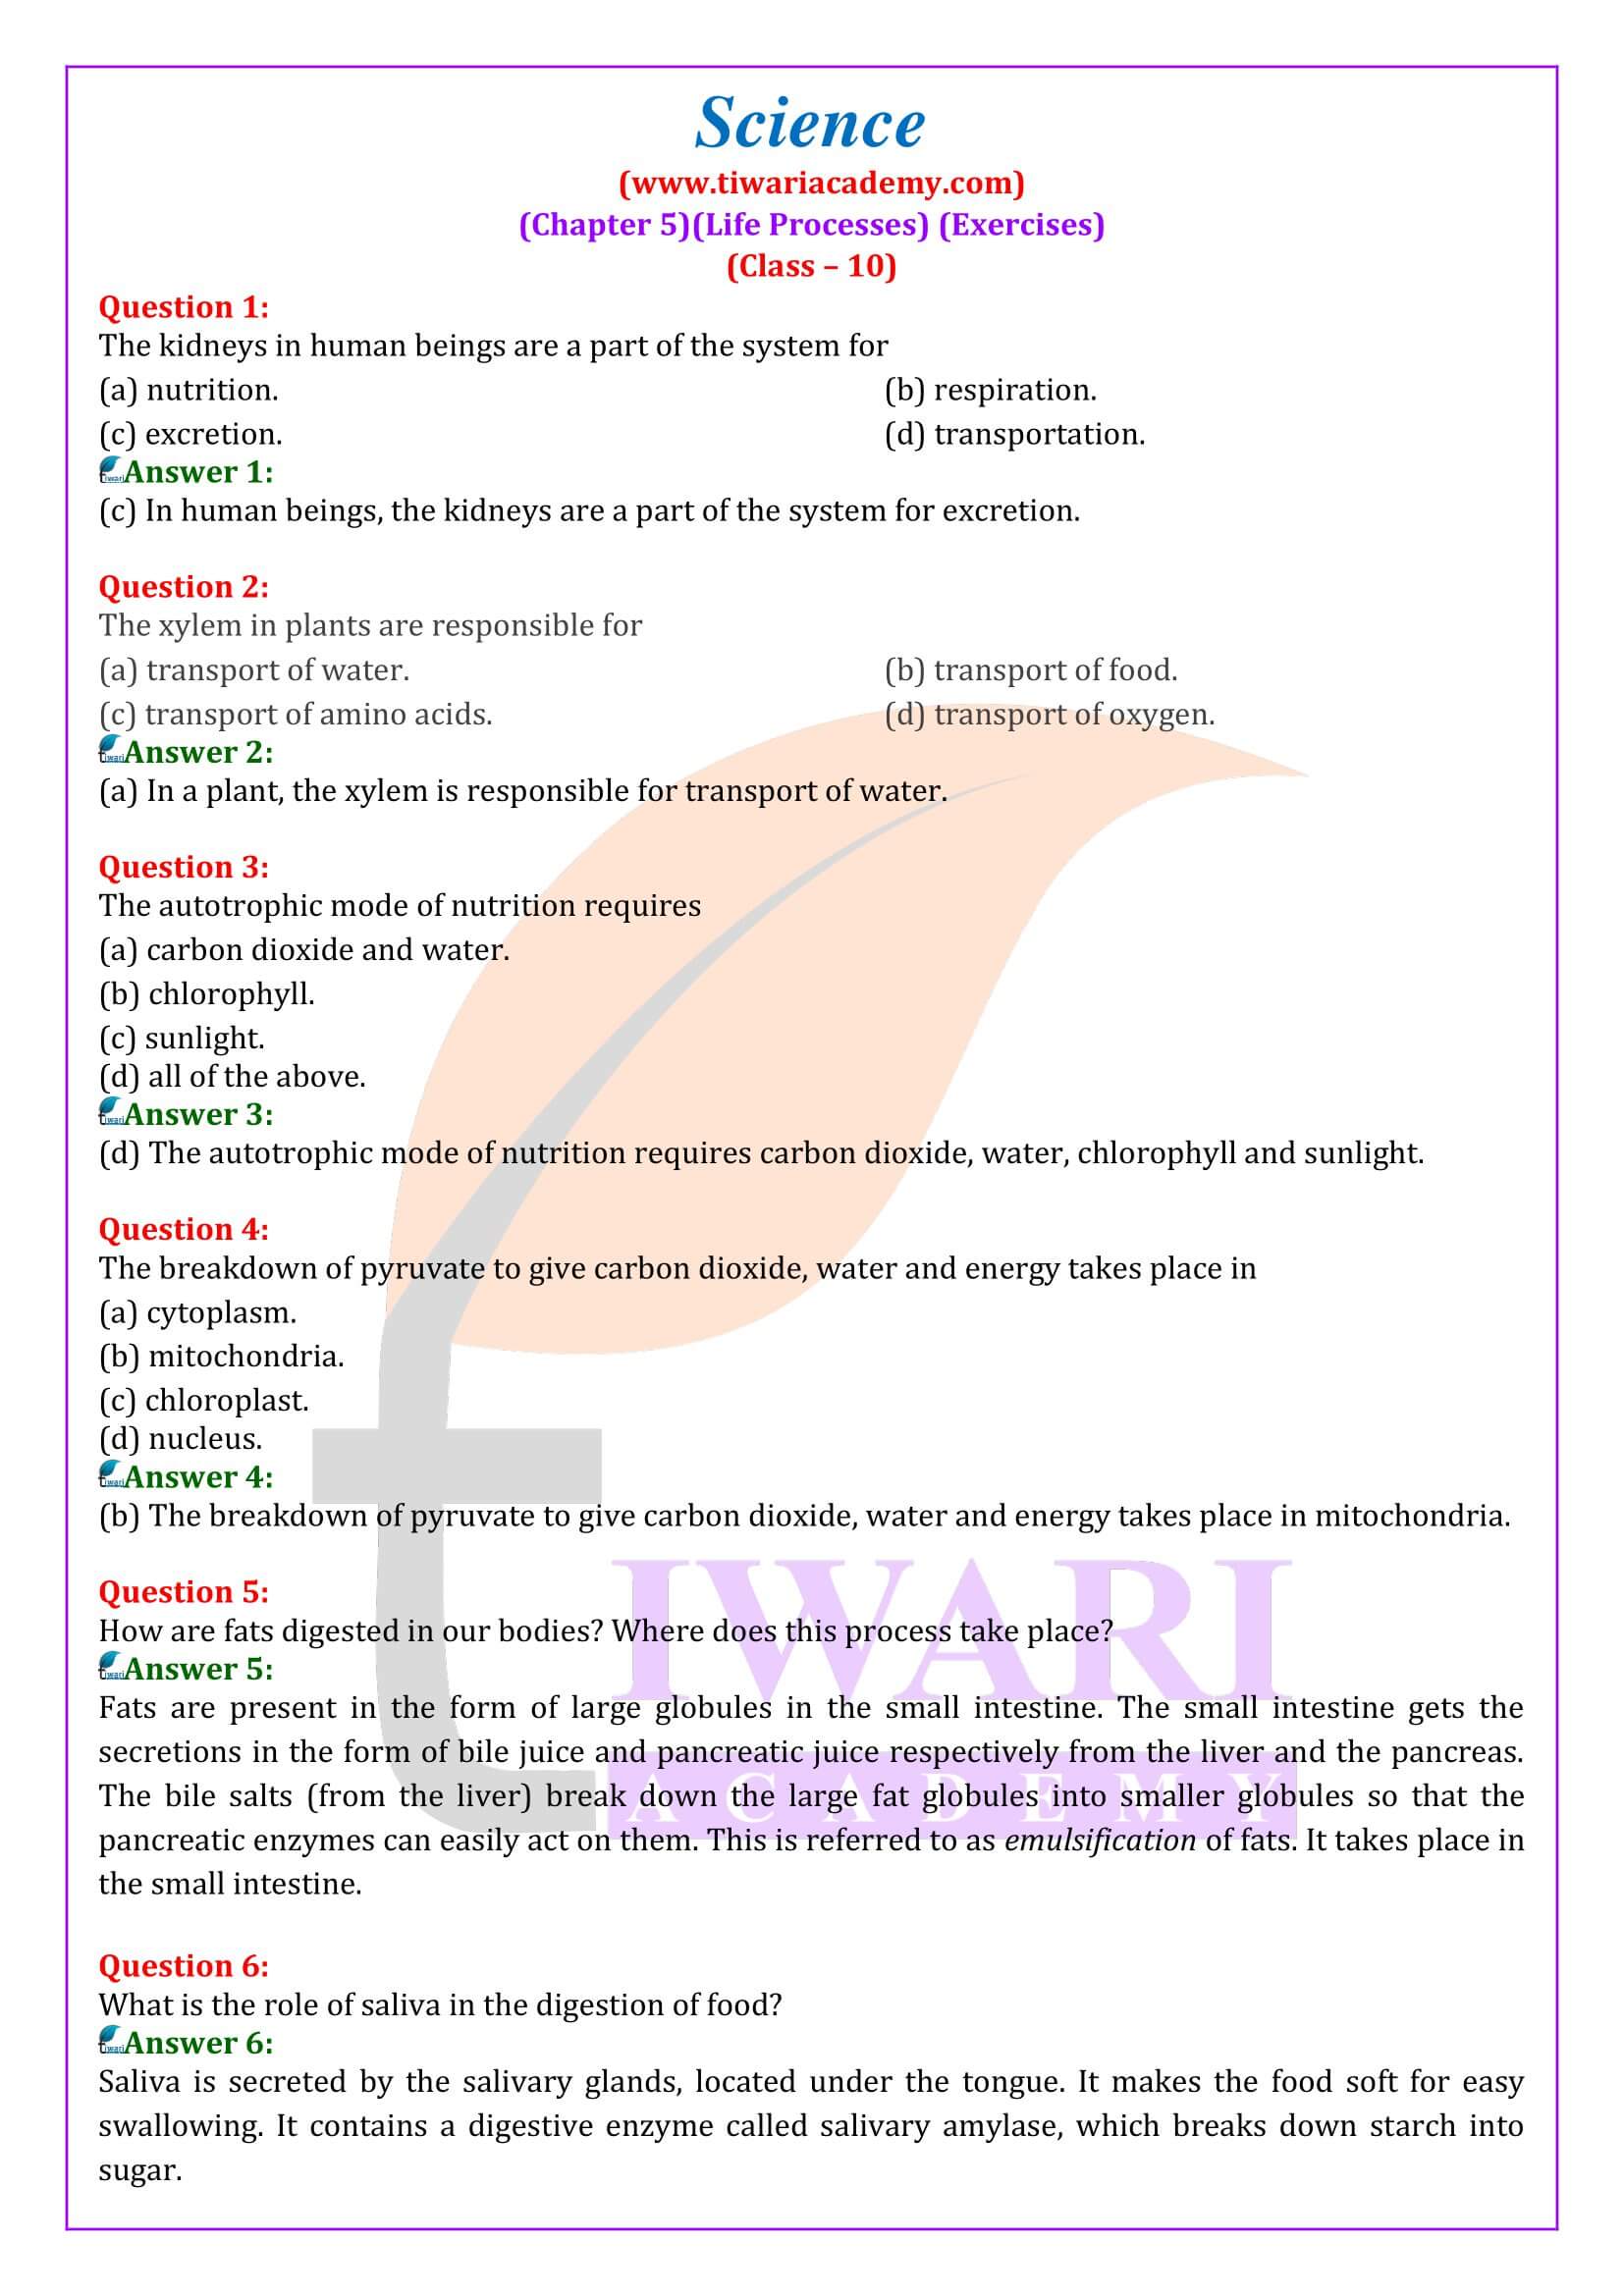 case study questions class 10 science life processes